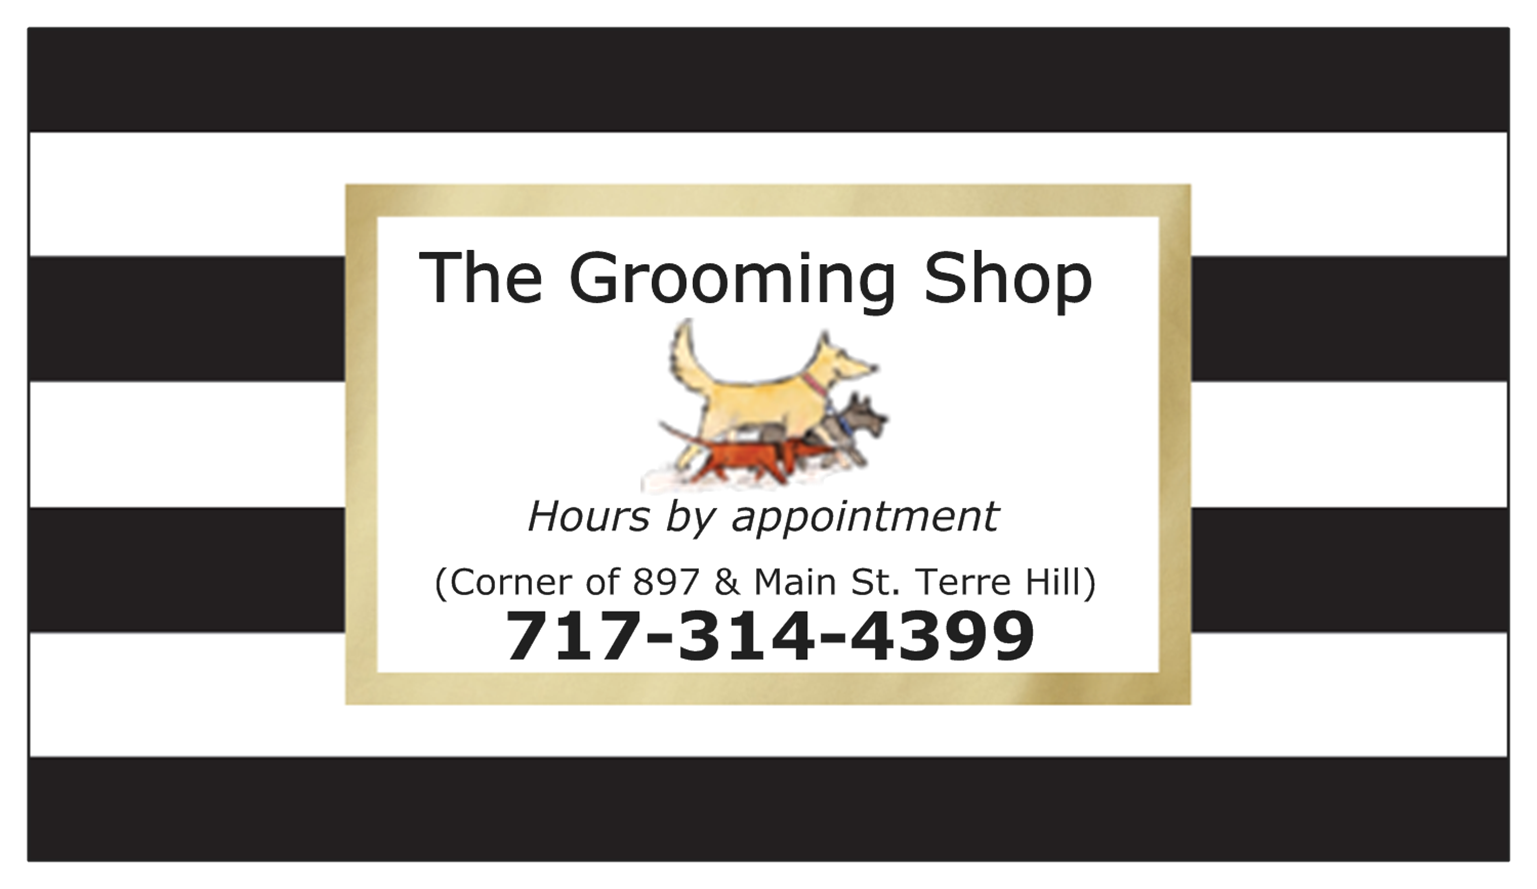 The Grooming Shop